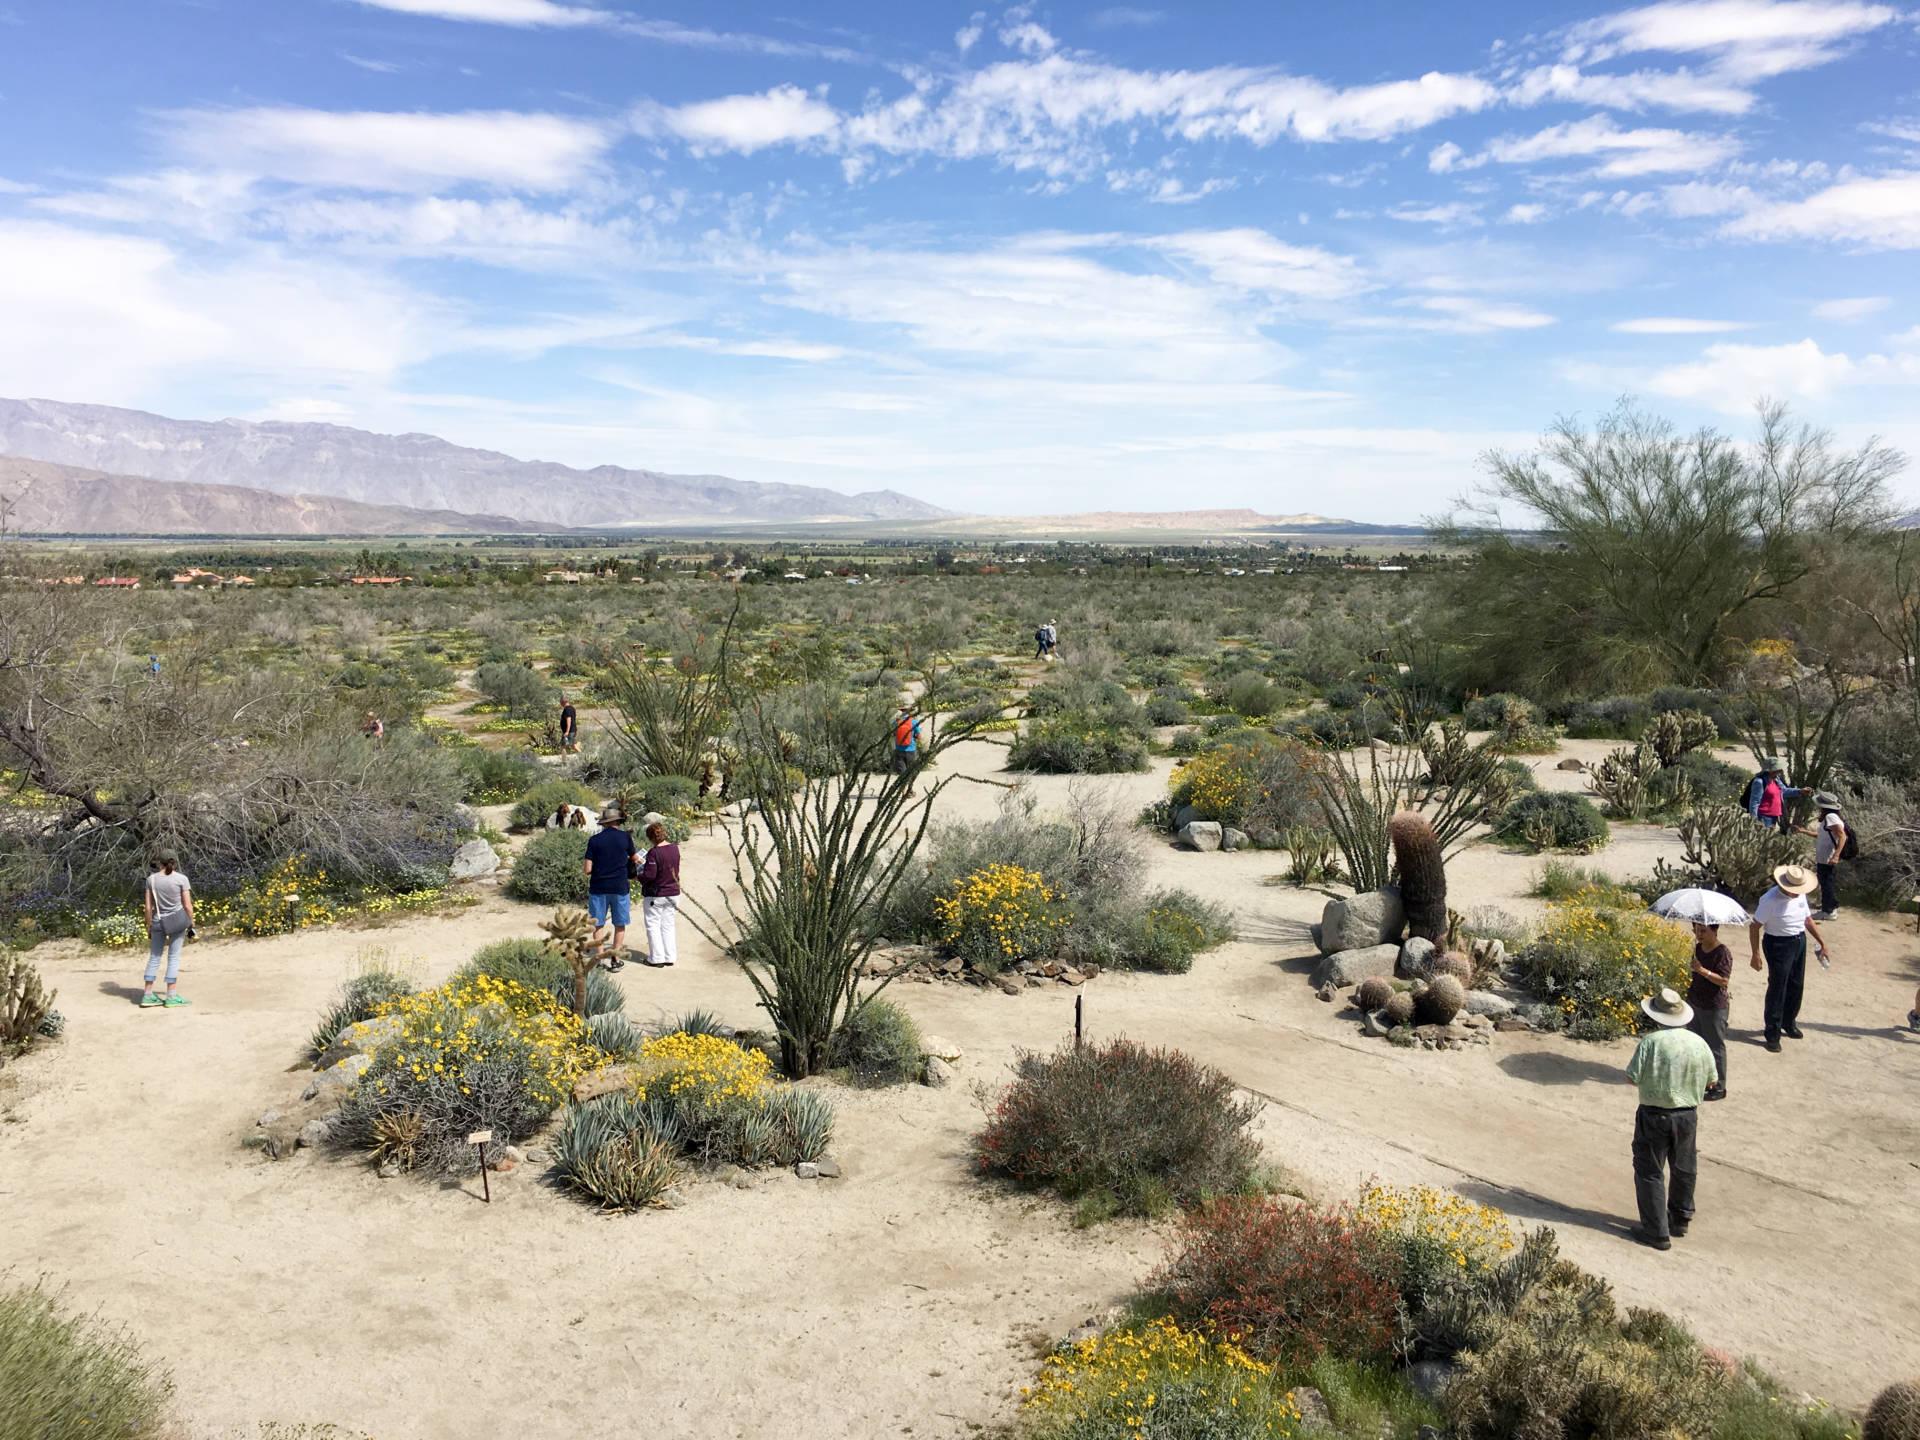 People are scattered throughout the hills and valleys of Anza-Borrego, Califonia's largest state park, taking in the beauty of a rare "super bloom" of wild flowers. NIna Gregory/NPR